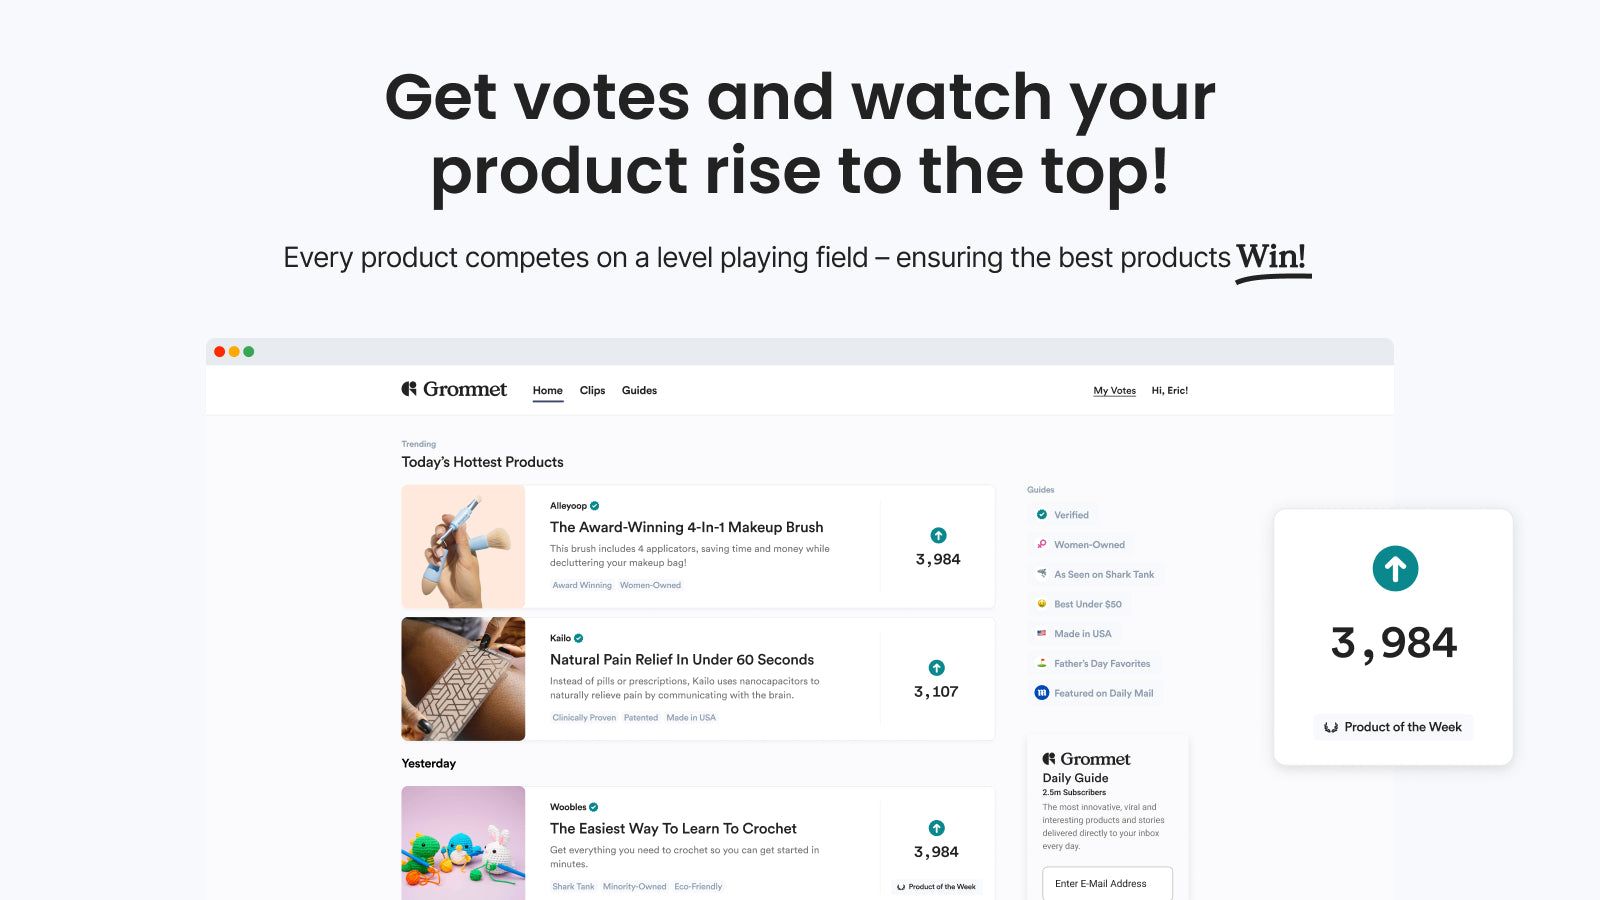 Get votes and watch your product rise to the top.